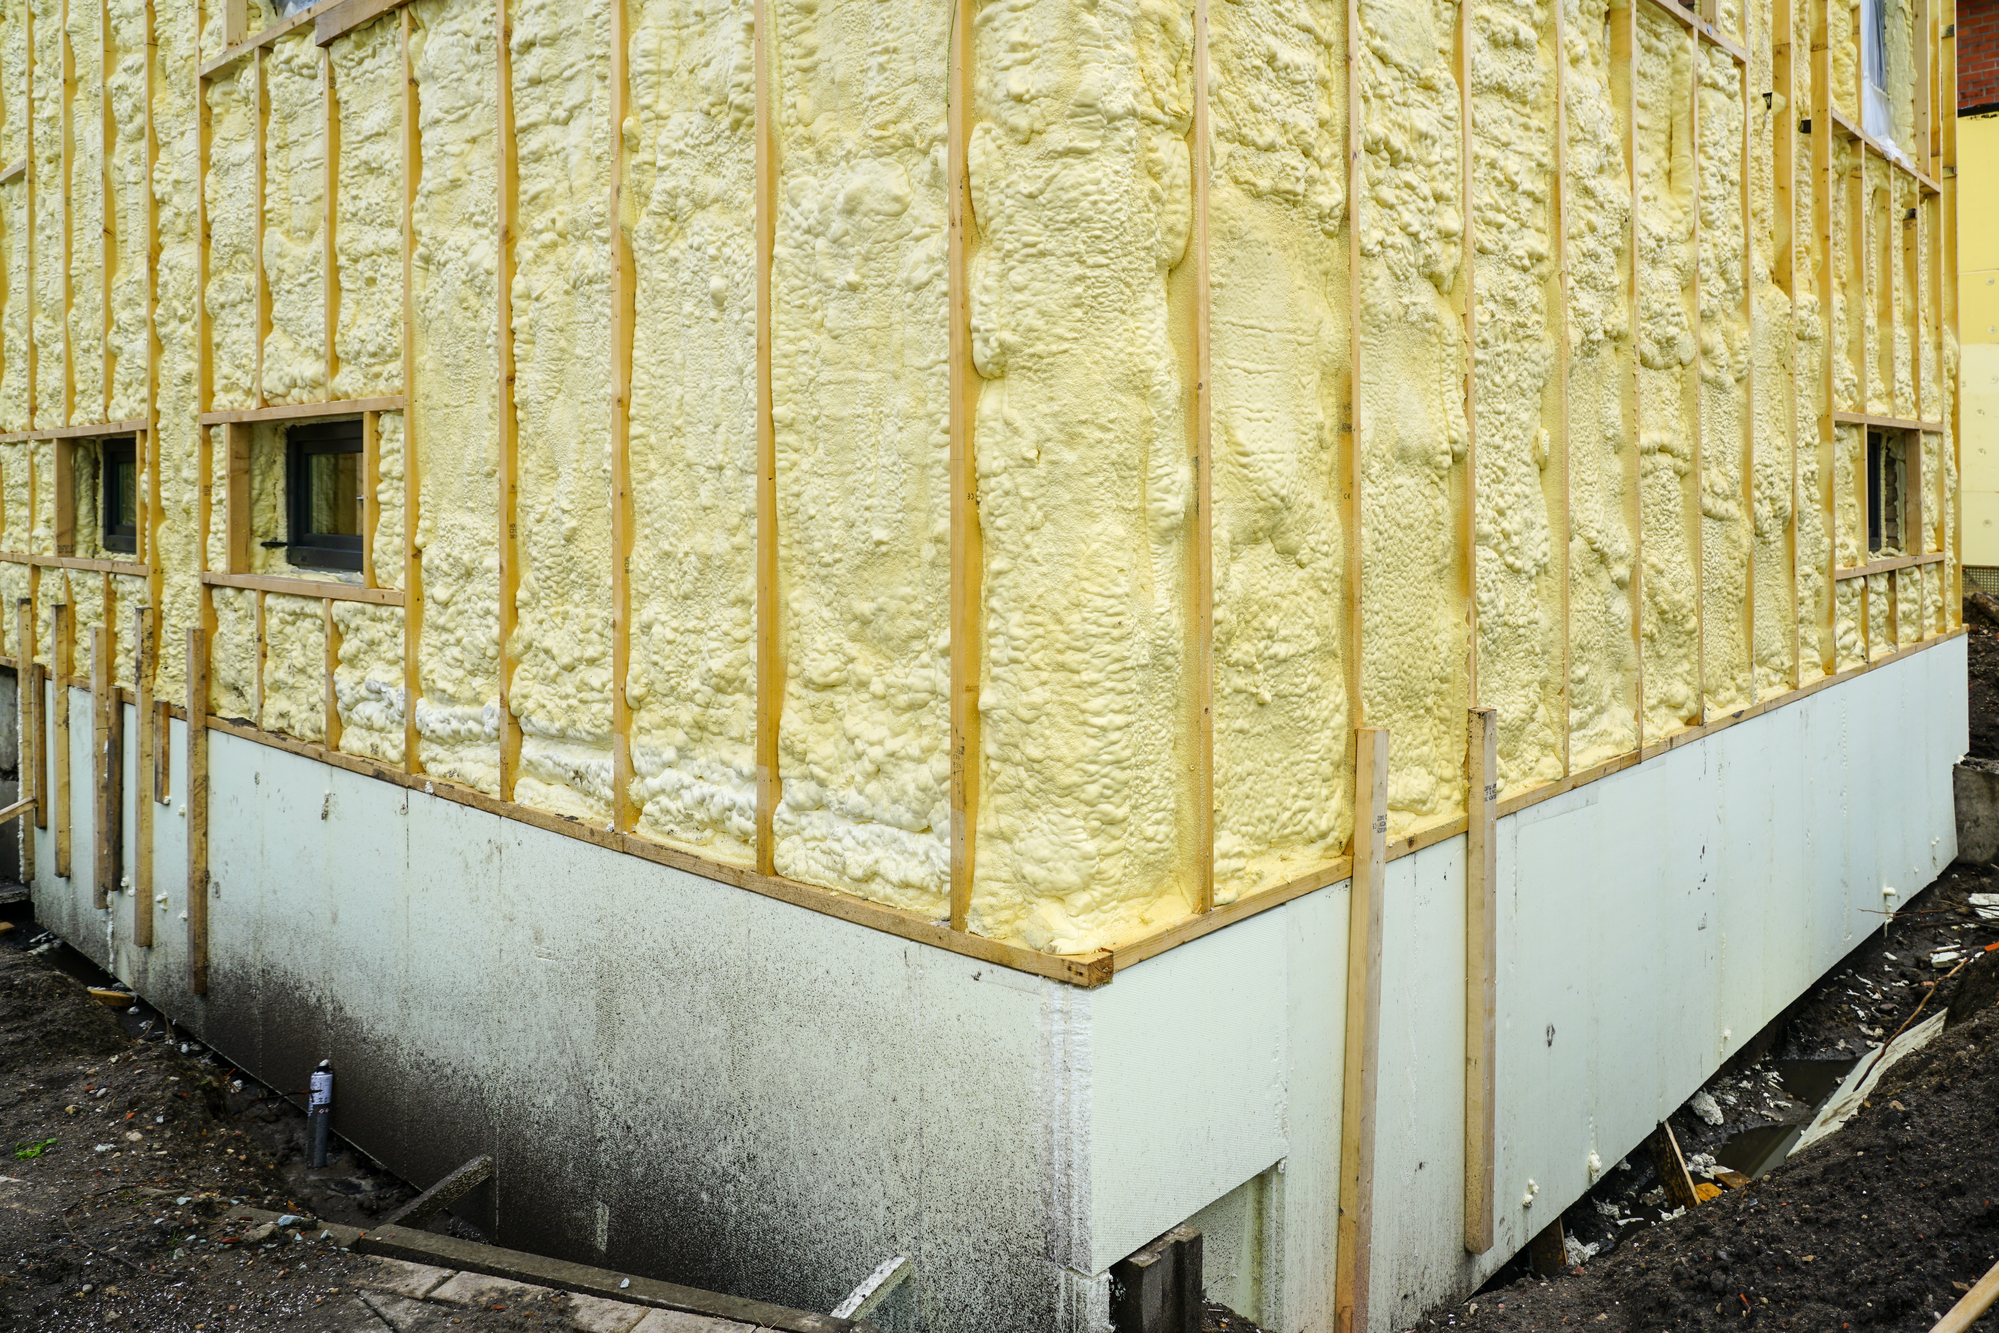 The facade of the residential house sprayed with a layer of polyurethane thermal insulation foam before siding, foundation insulation with foam boards